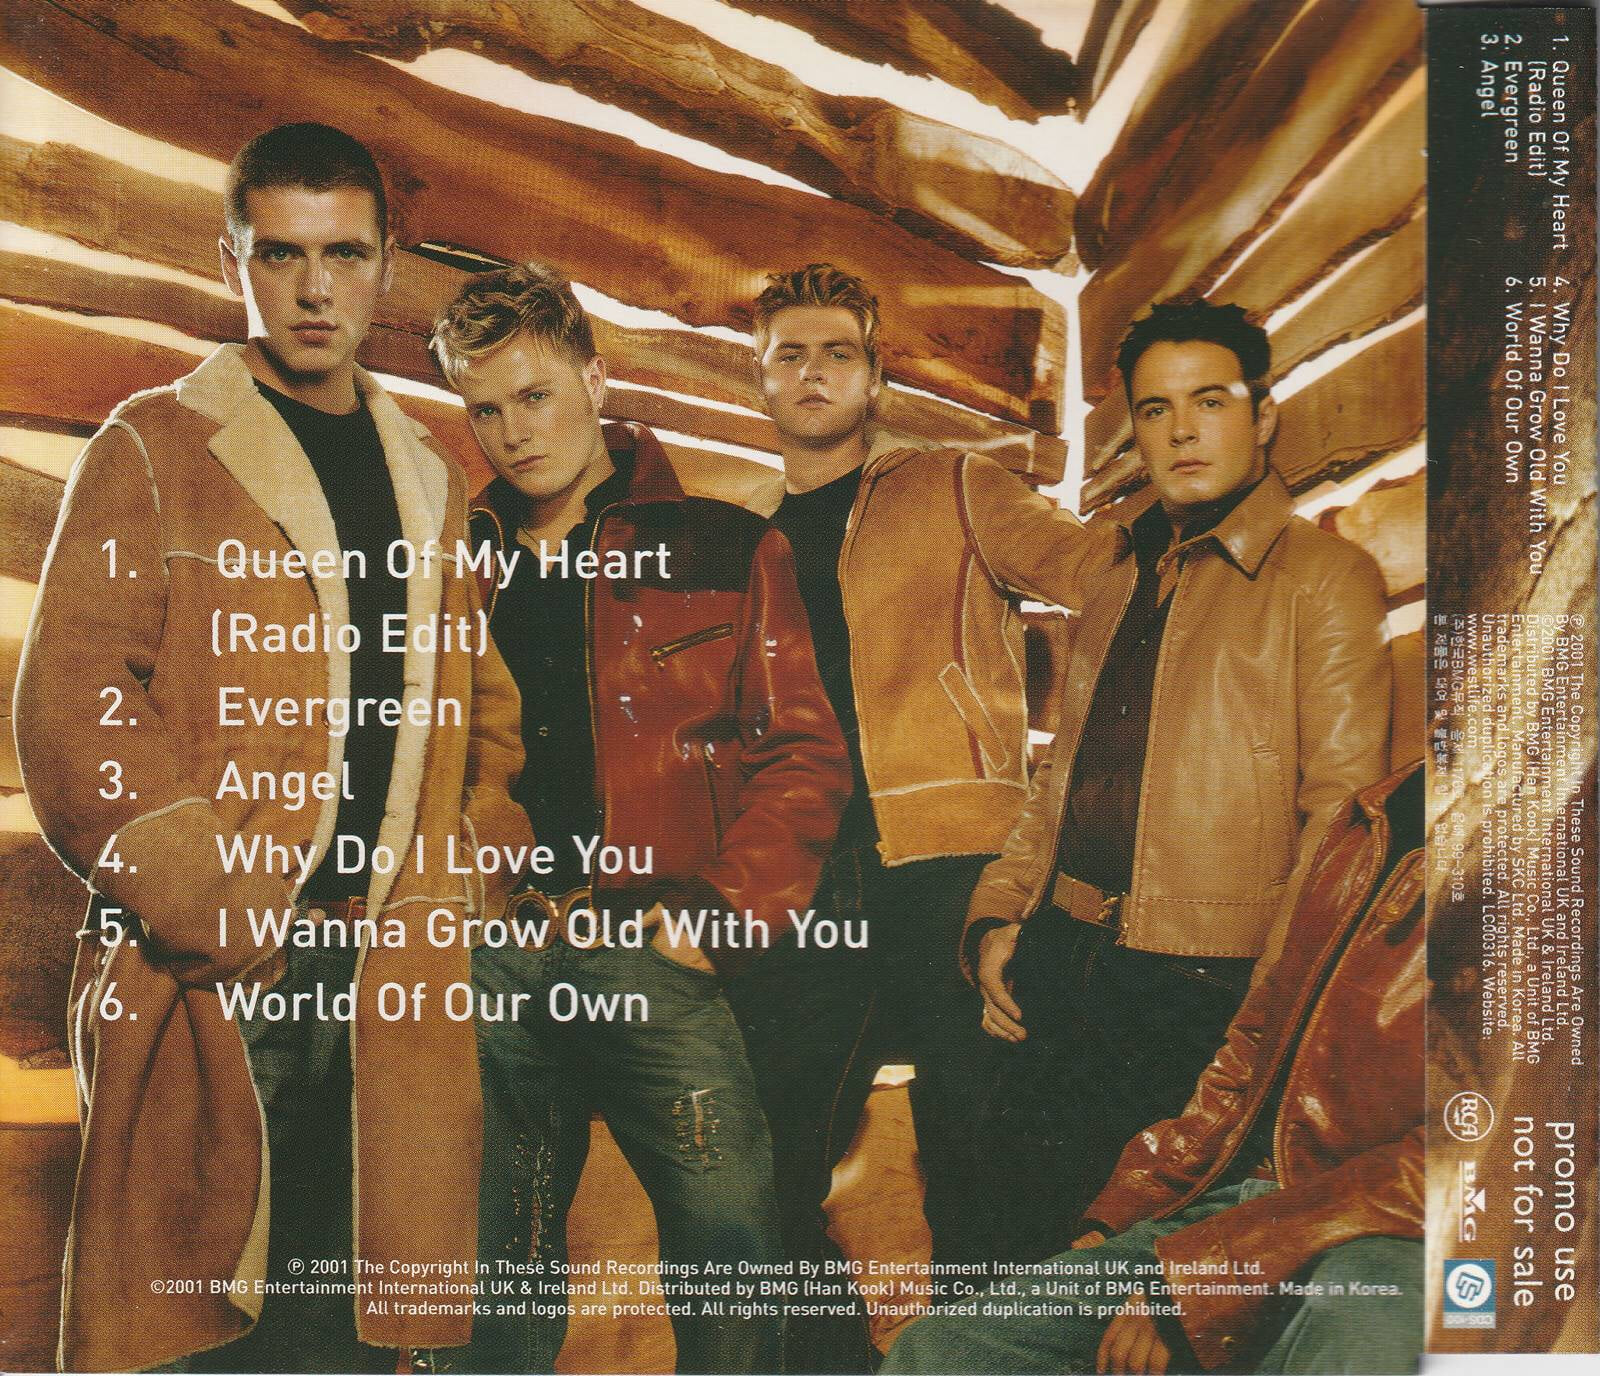 Westlife - World Of Our Own(single)